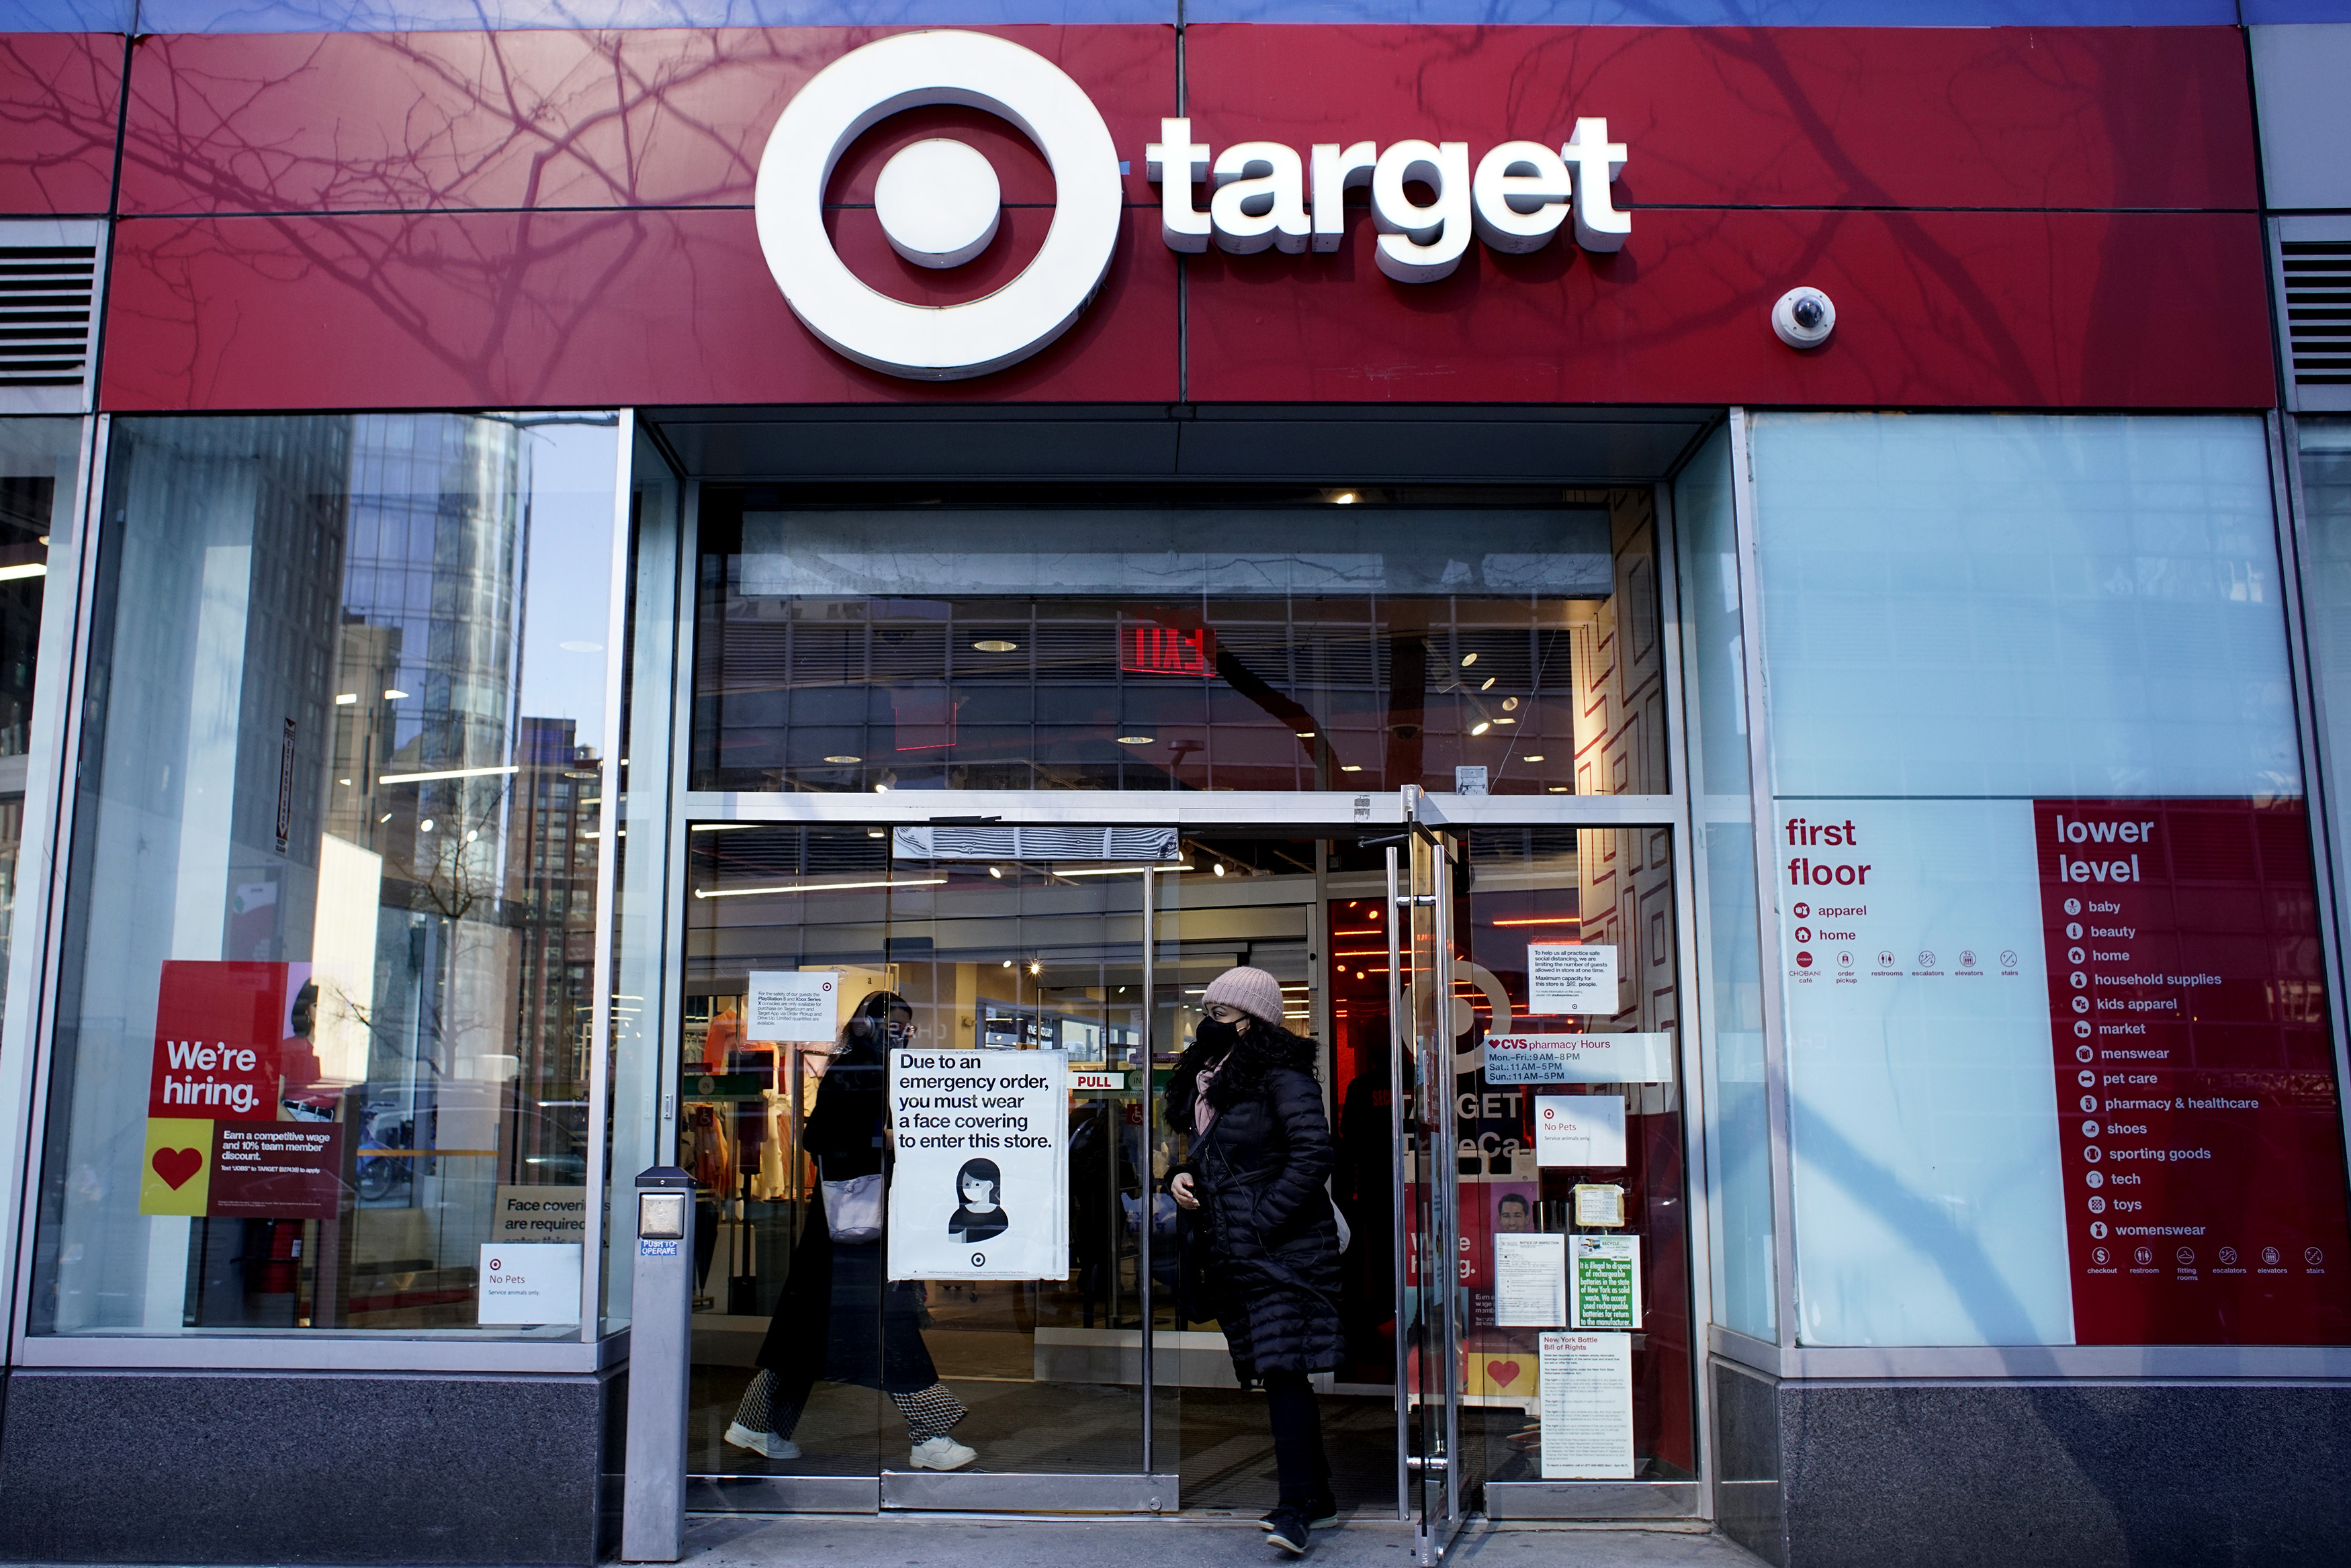 Target Corporation executives said they will begin closing all six of their San Francisco stories earlier than normal because of the city's rampant cr